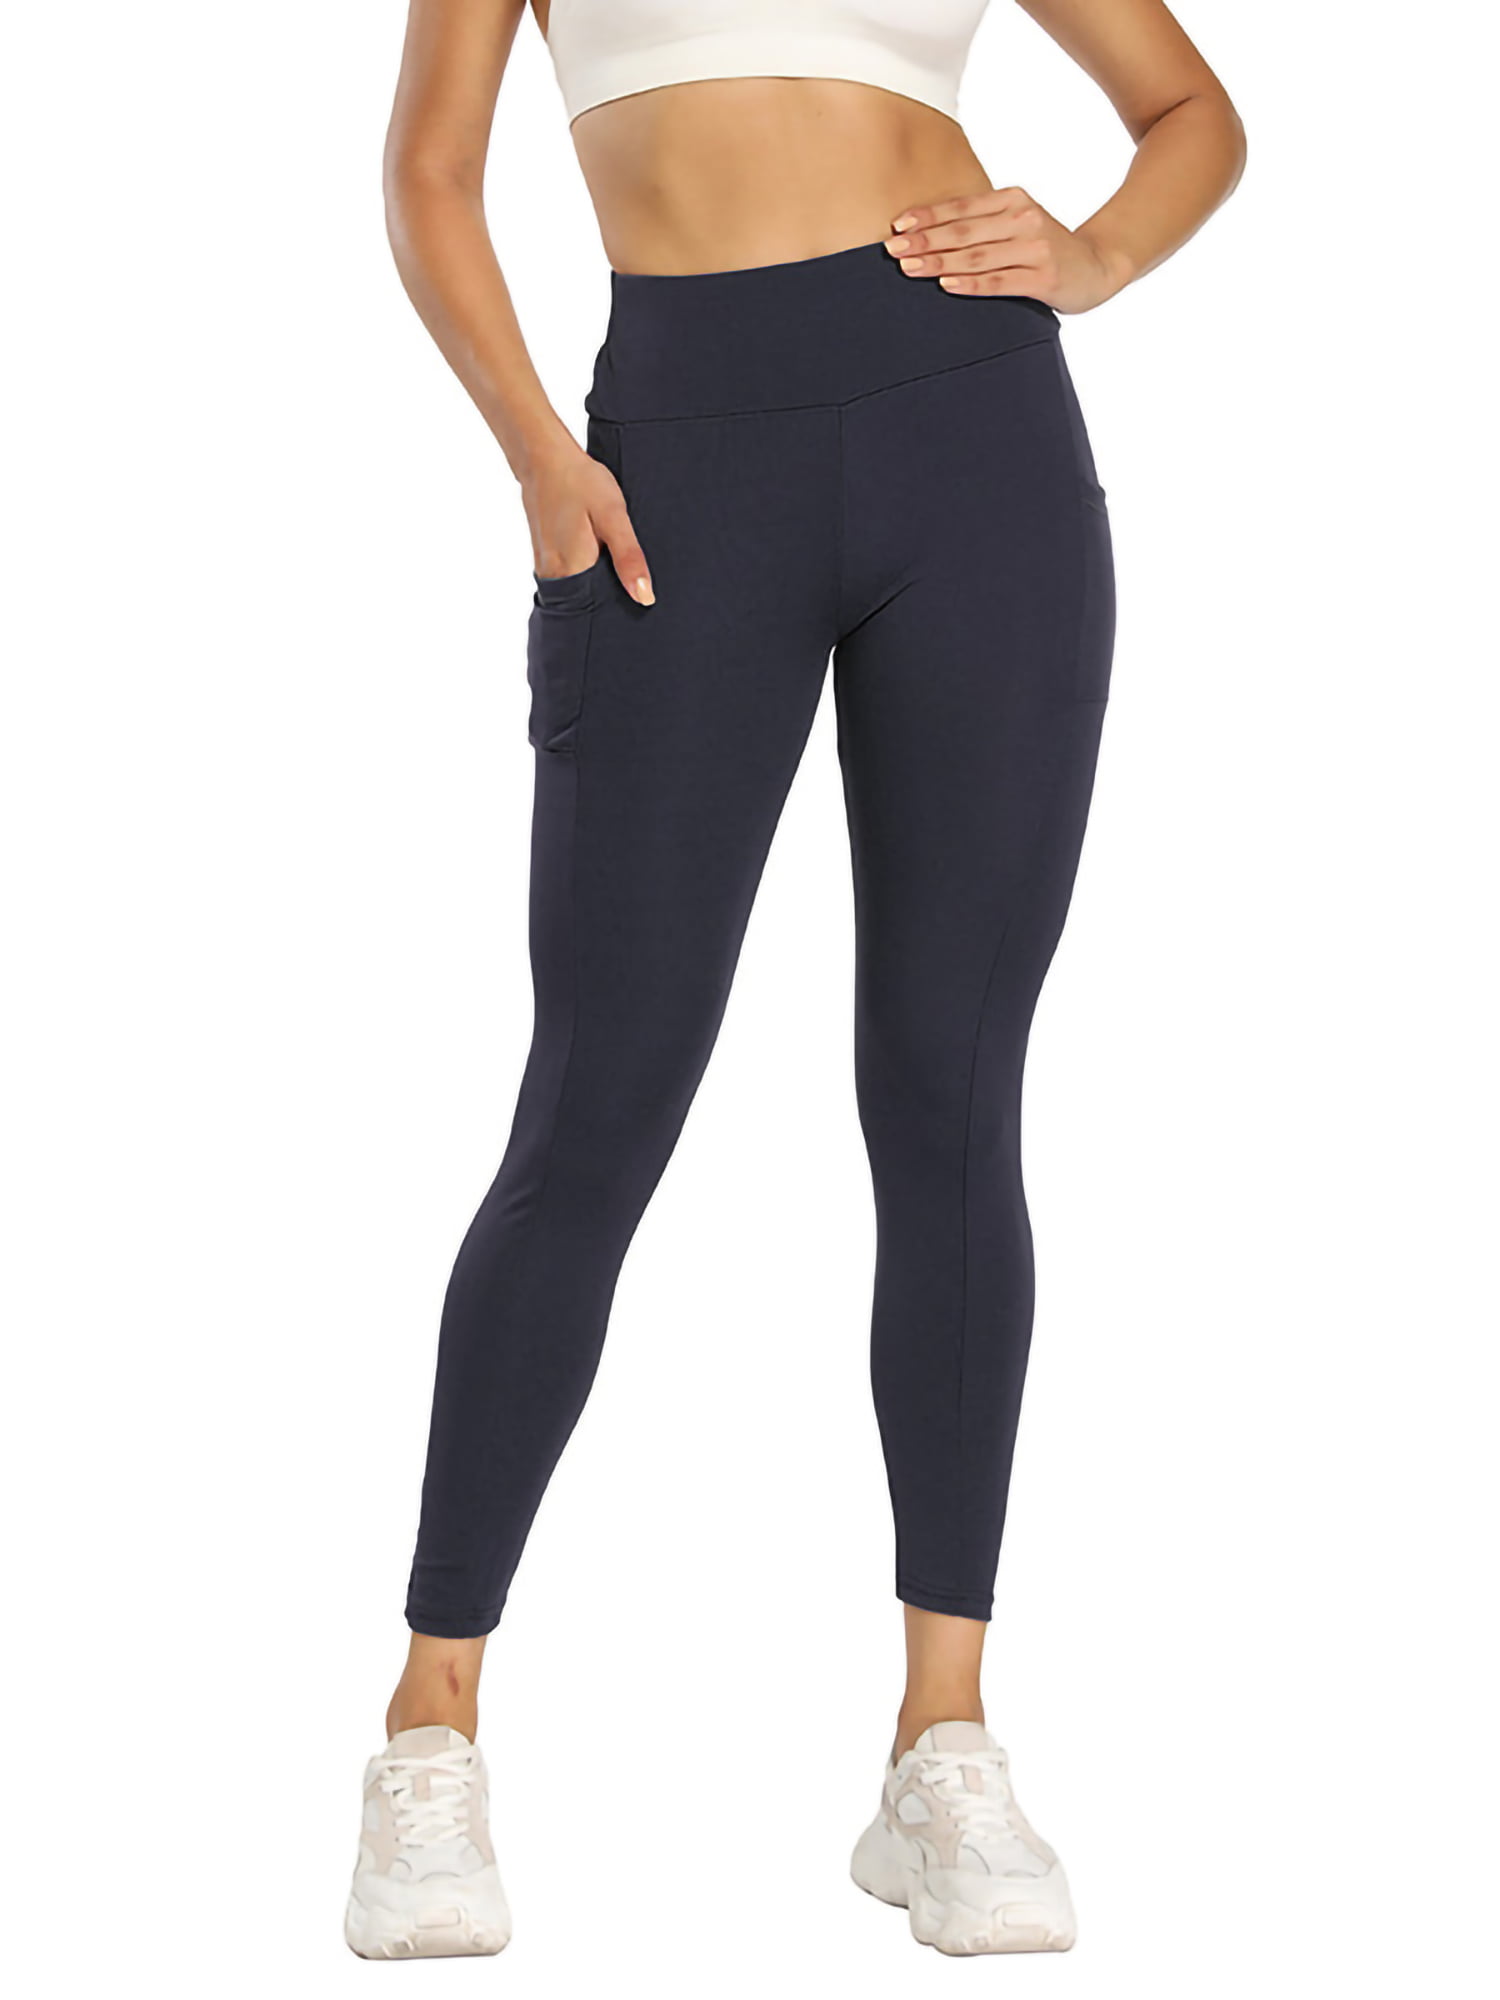 Women Casual Sports Pants with Pockets High Waist Legging Jeggings Gym ...